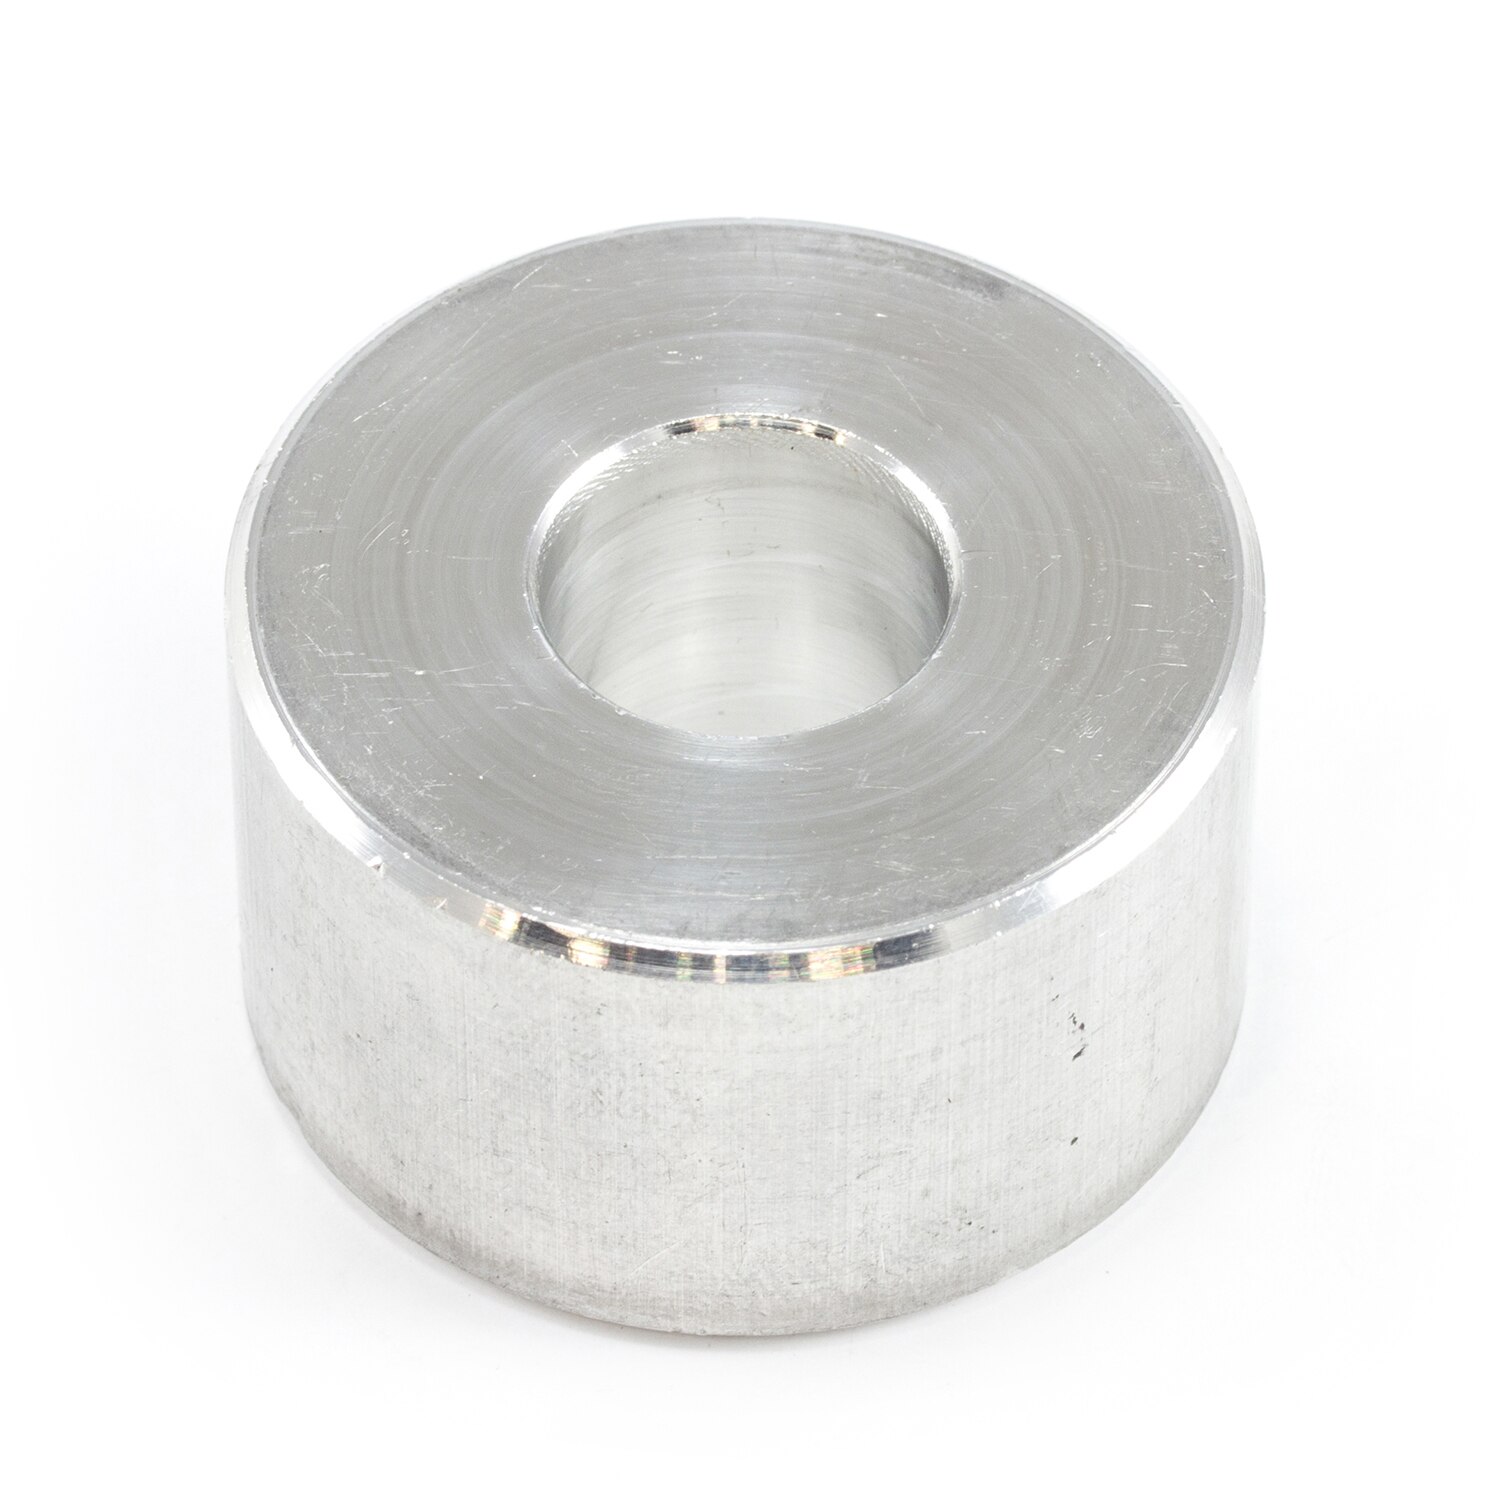 1 Thick, 2.150 Bore, 4500, Tapered Lightweight Aluminum Spacer